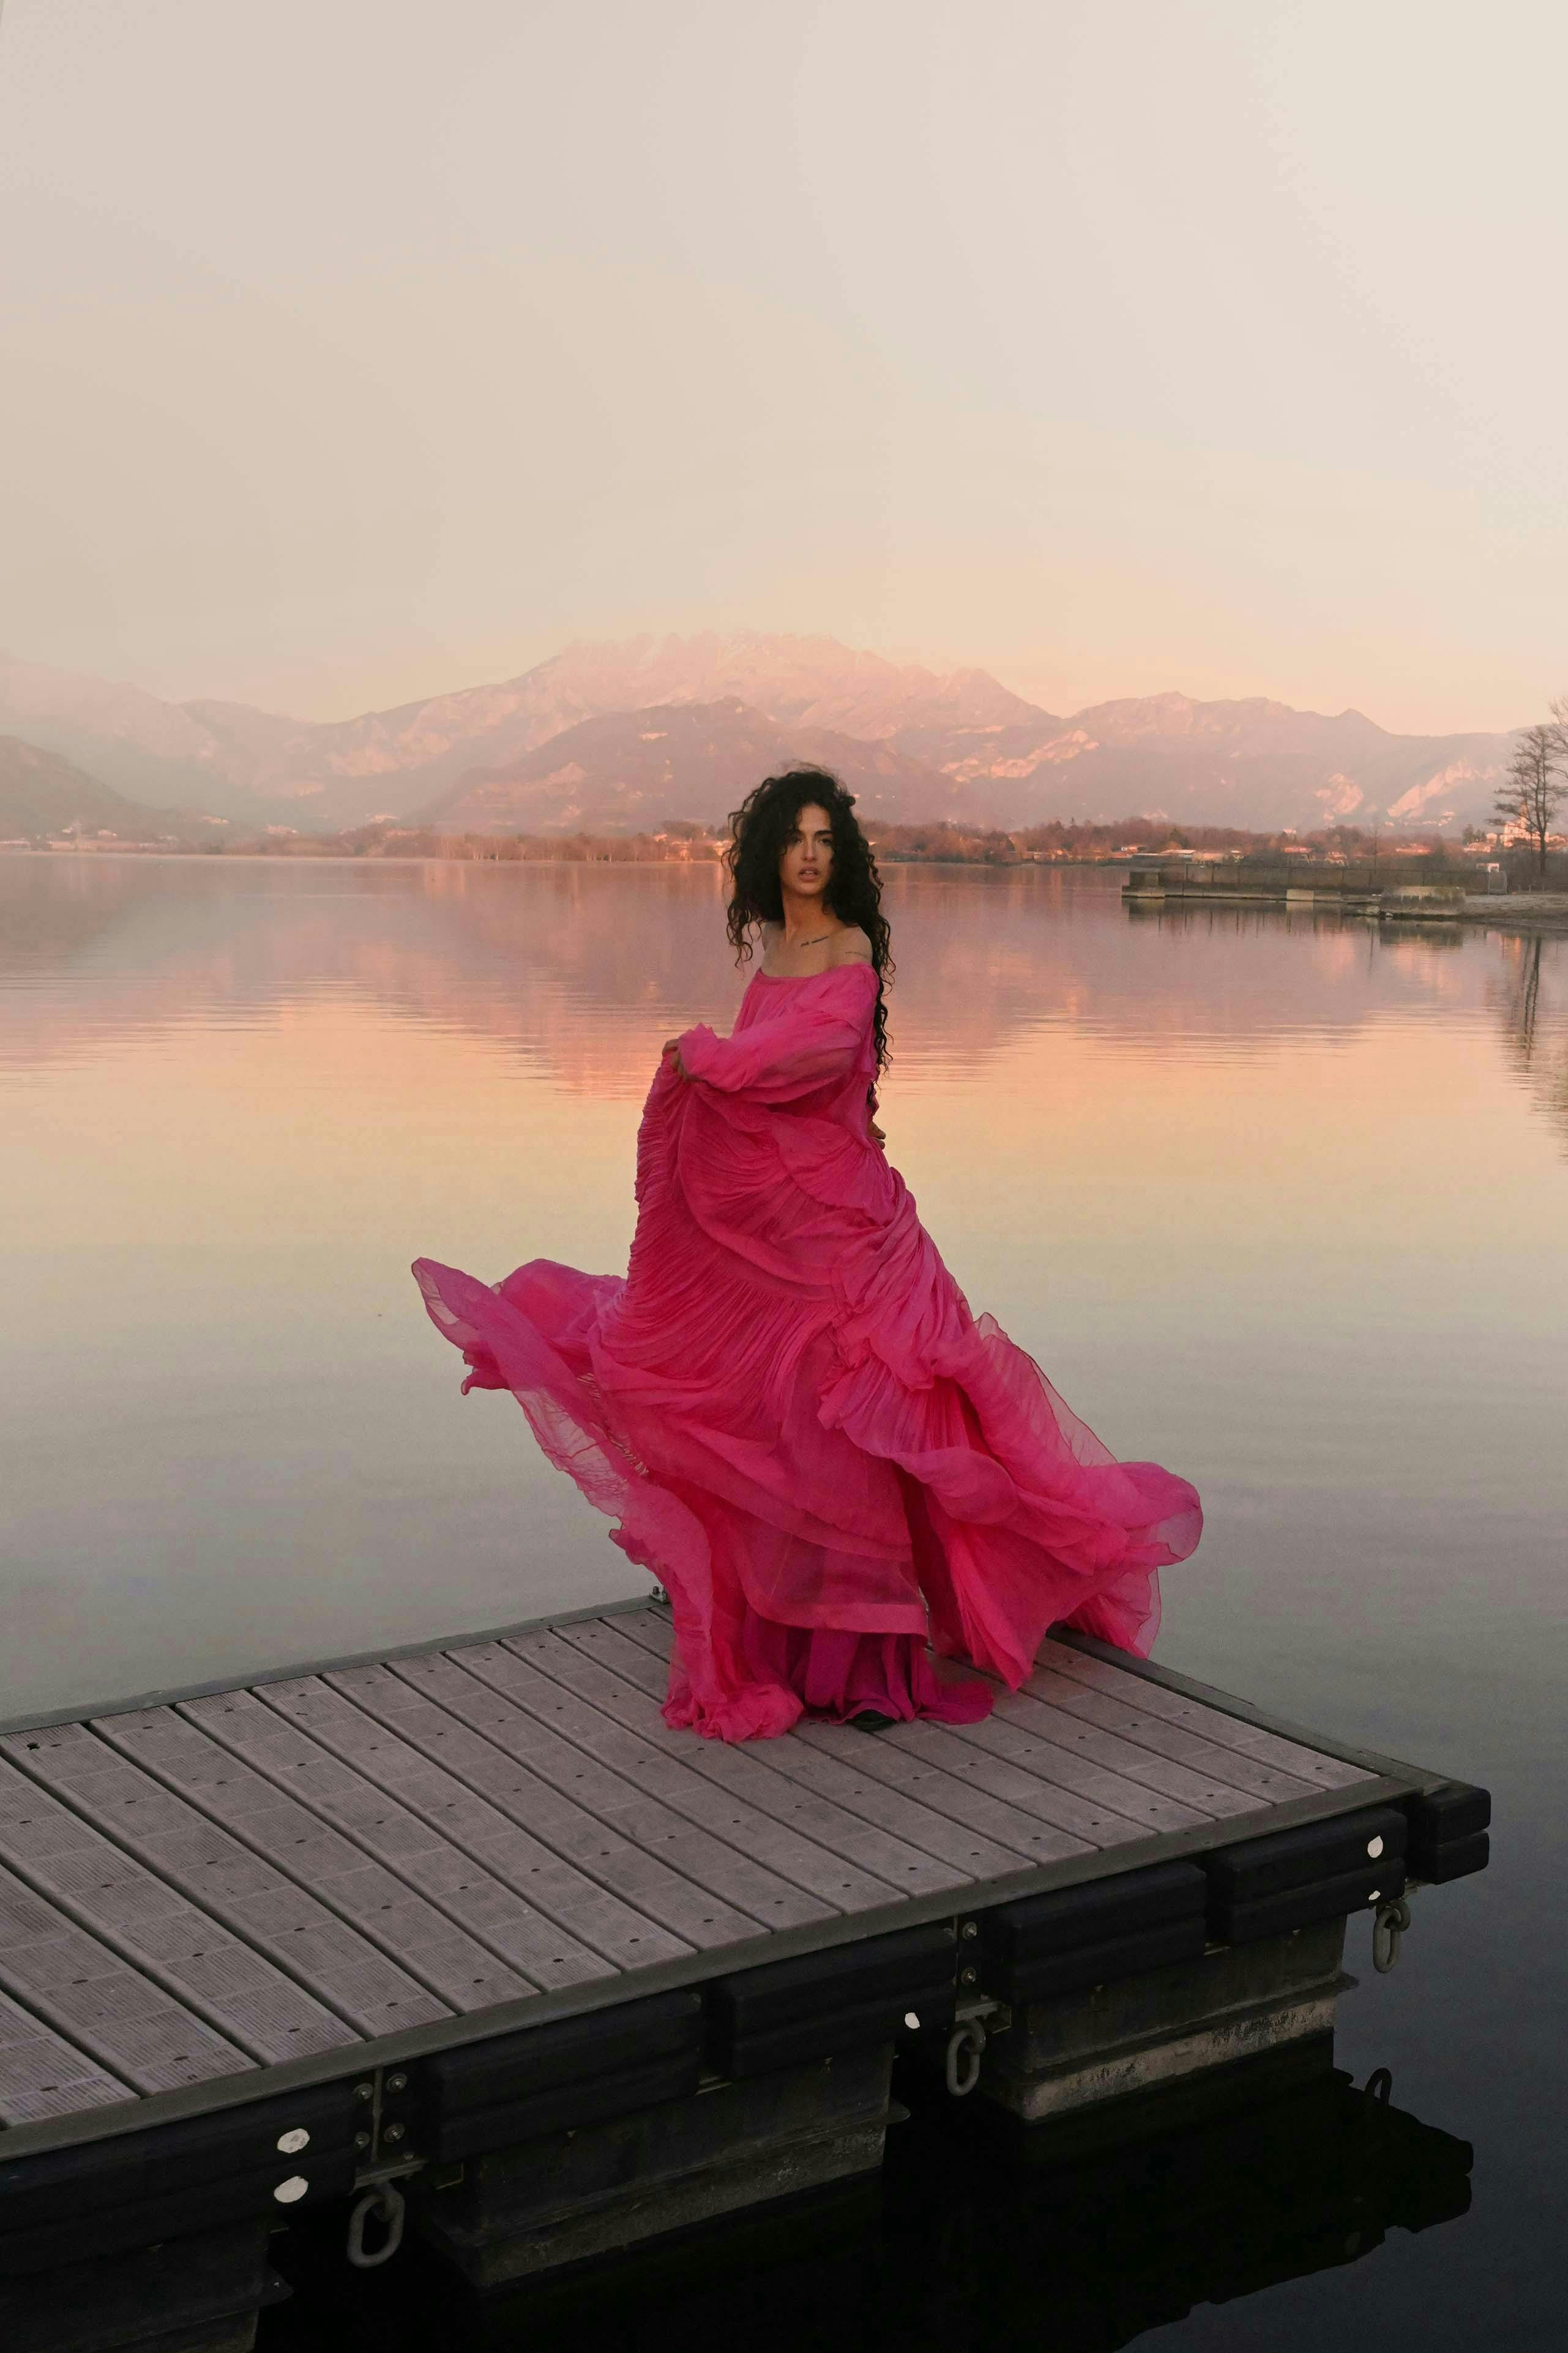 clothing gown robe evening dress fashion water waterfront dance pose person pier